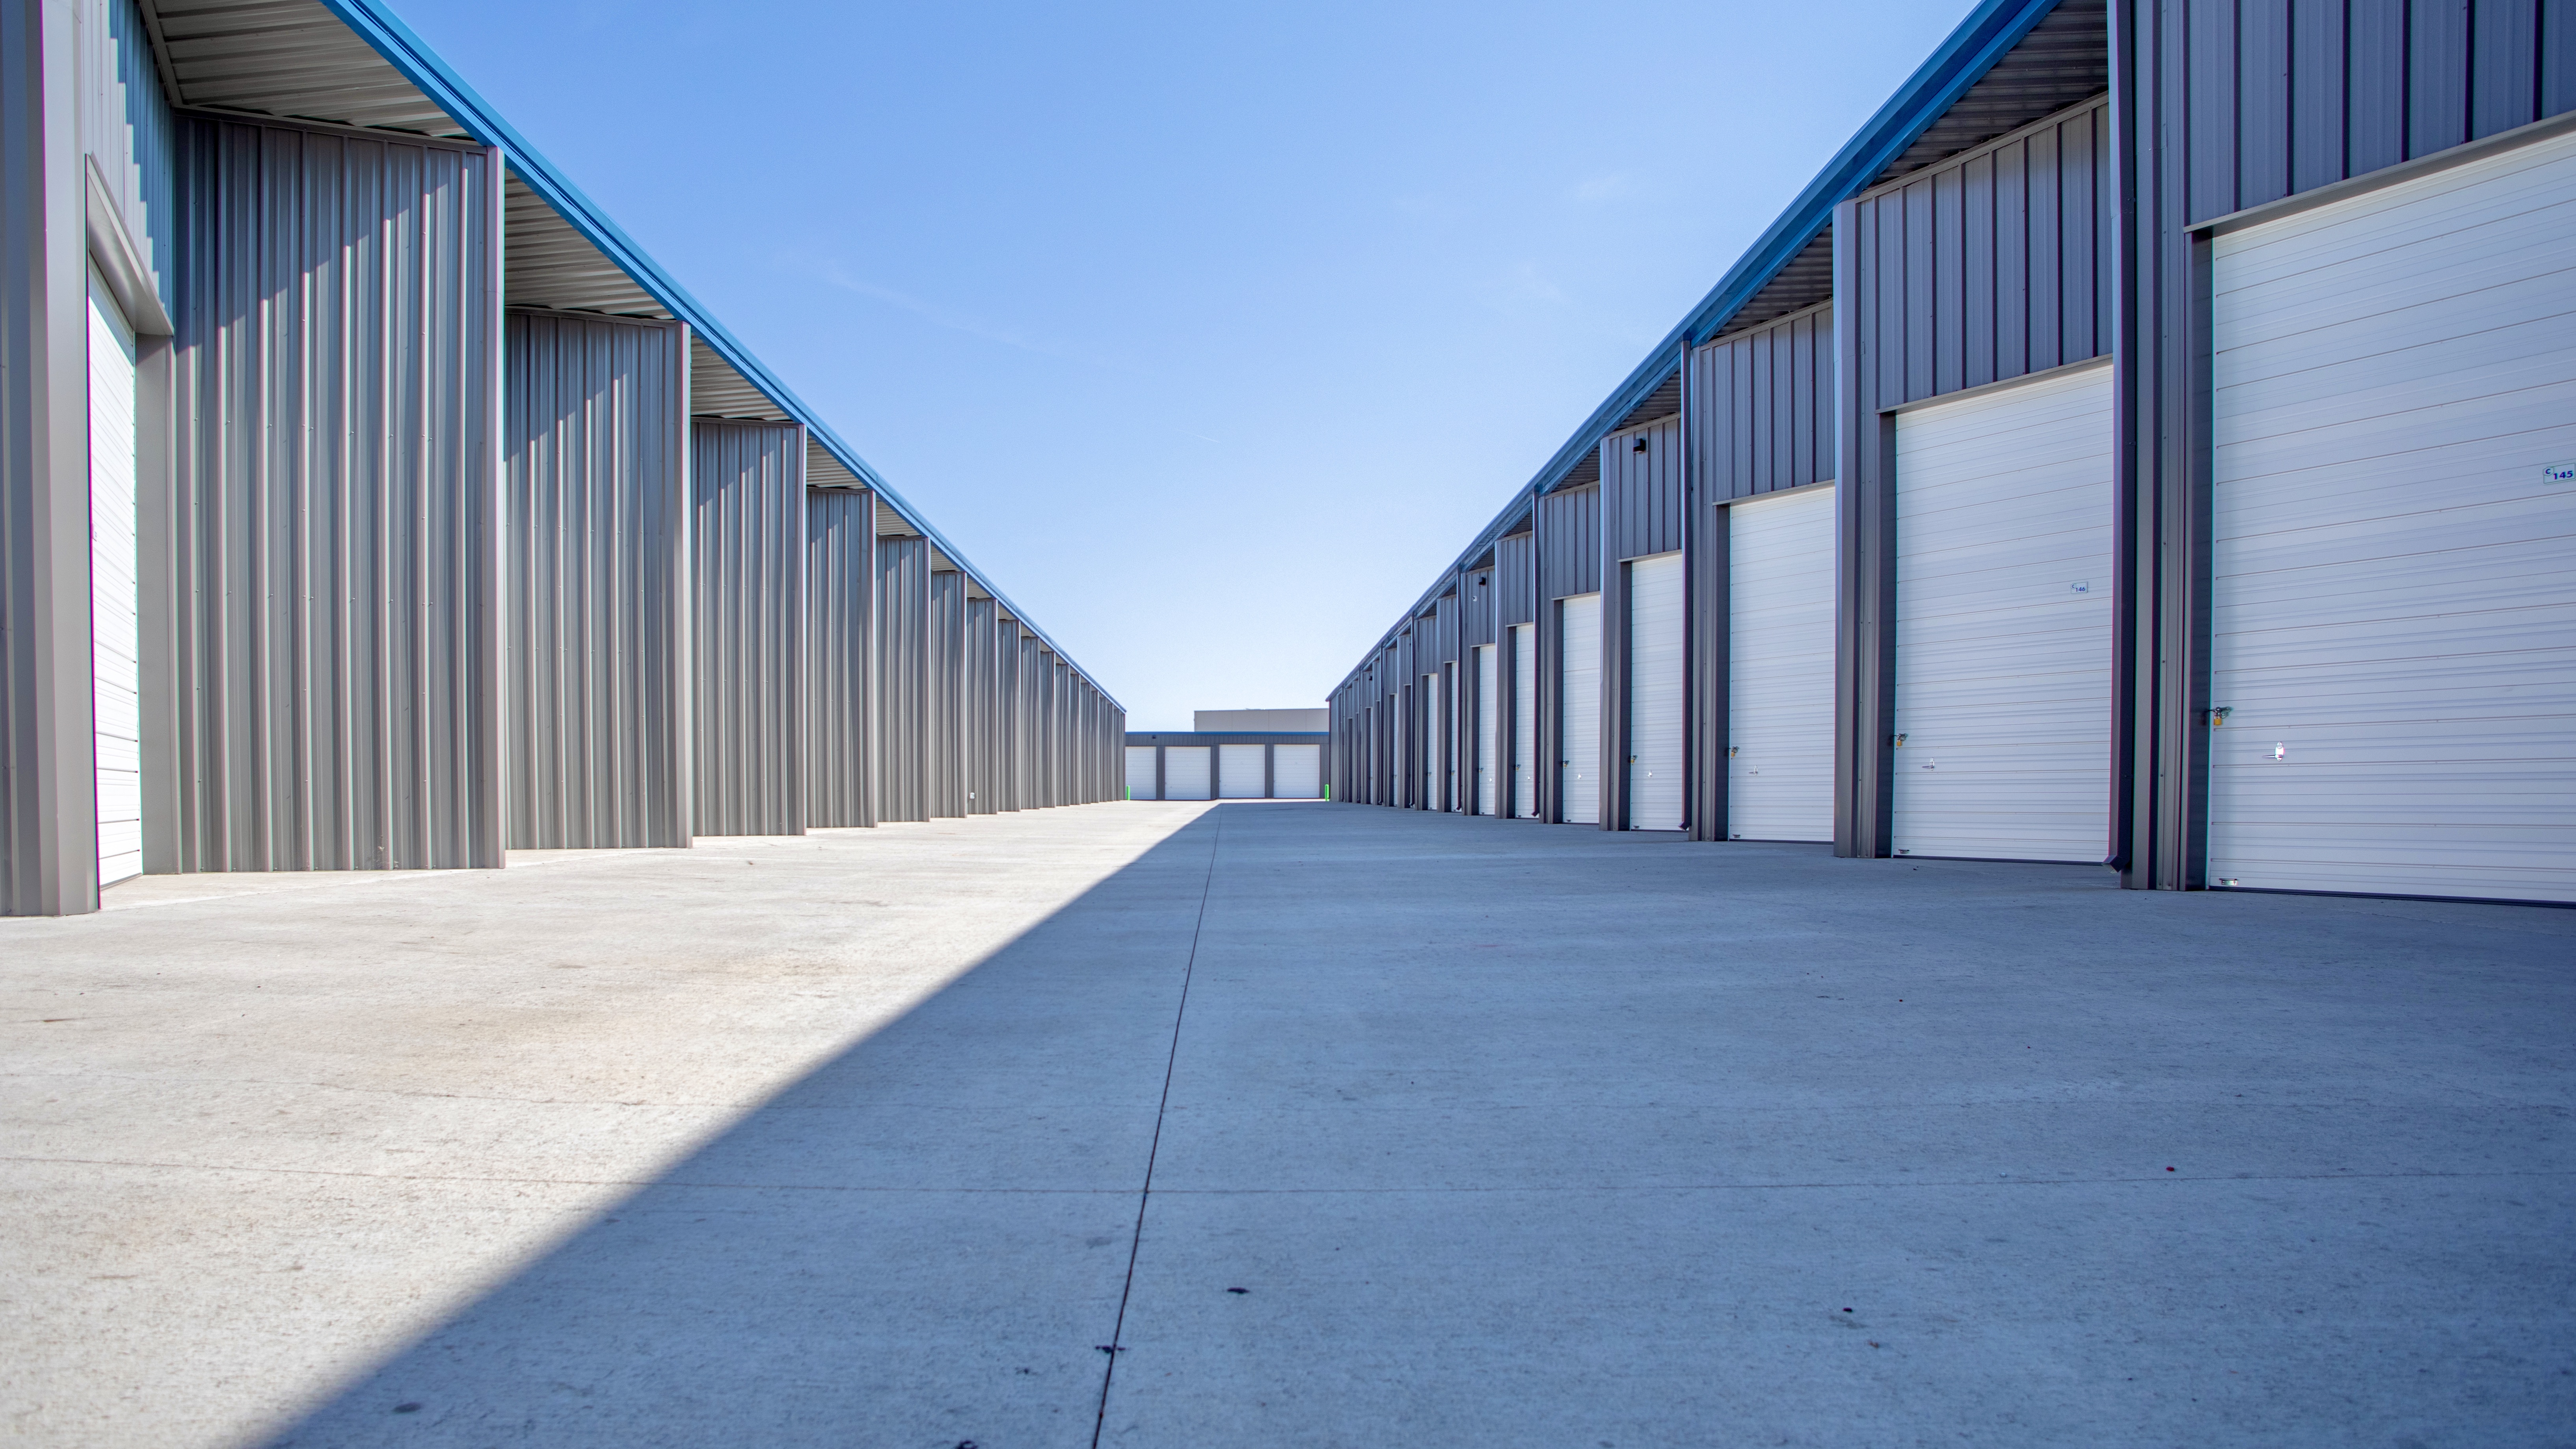 view of the wide aisles between angled storage units